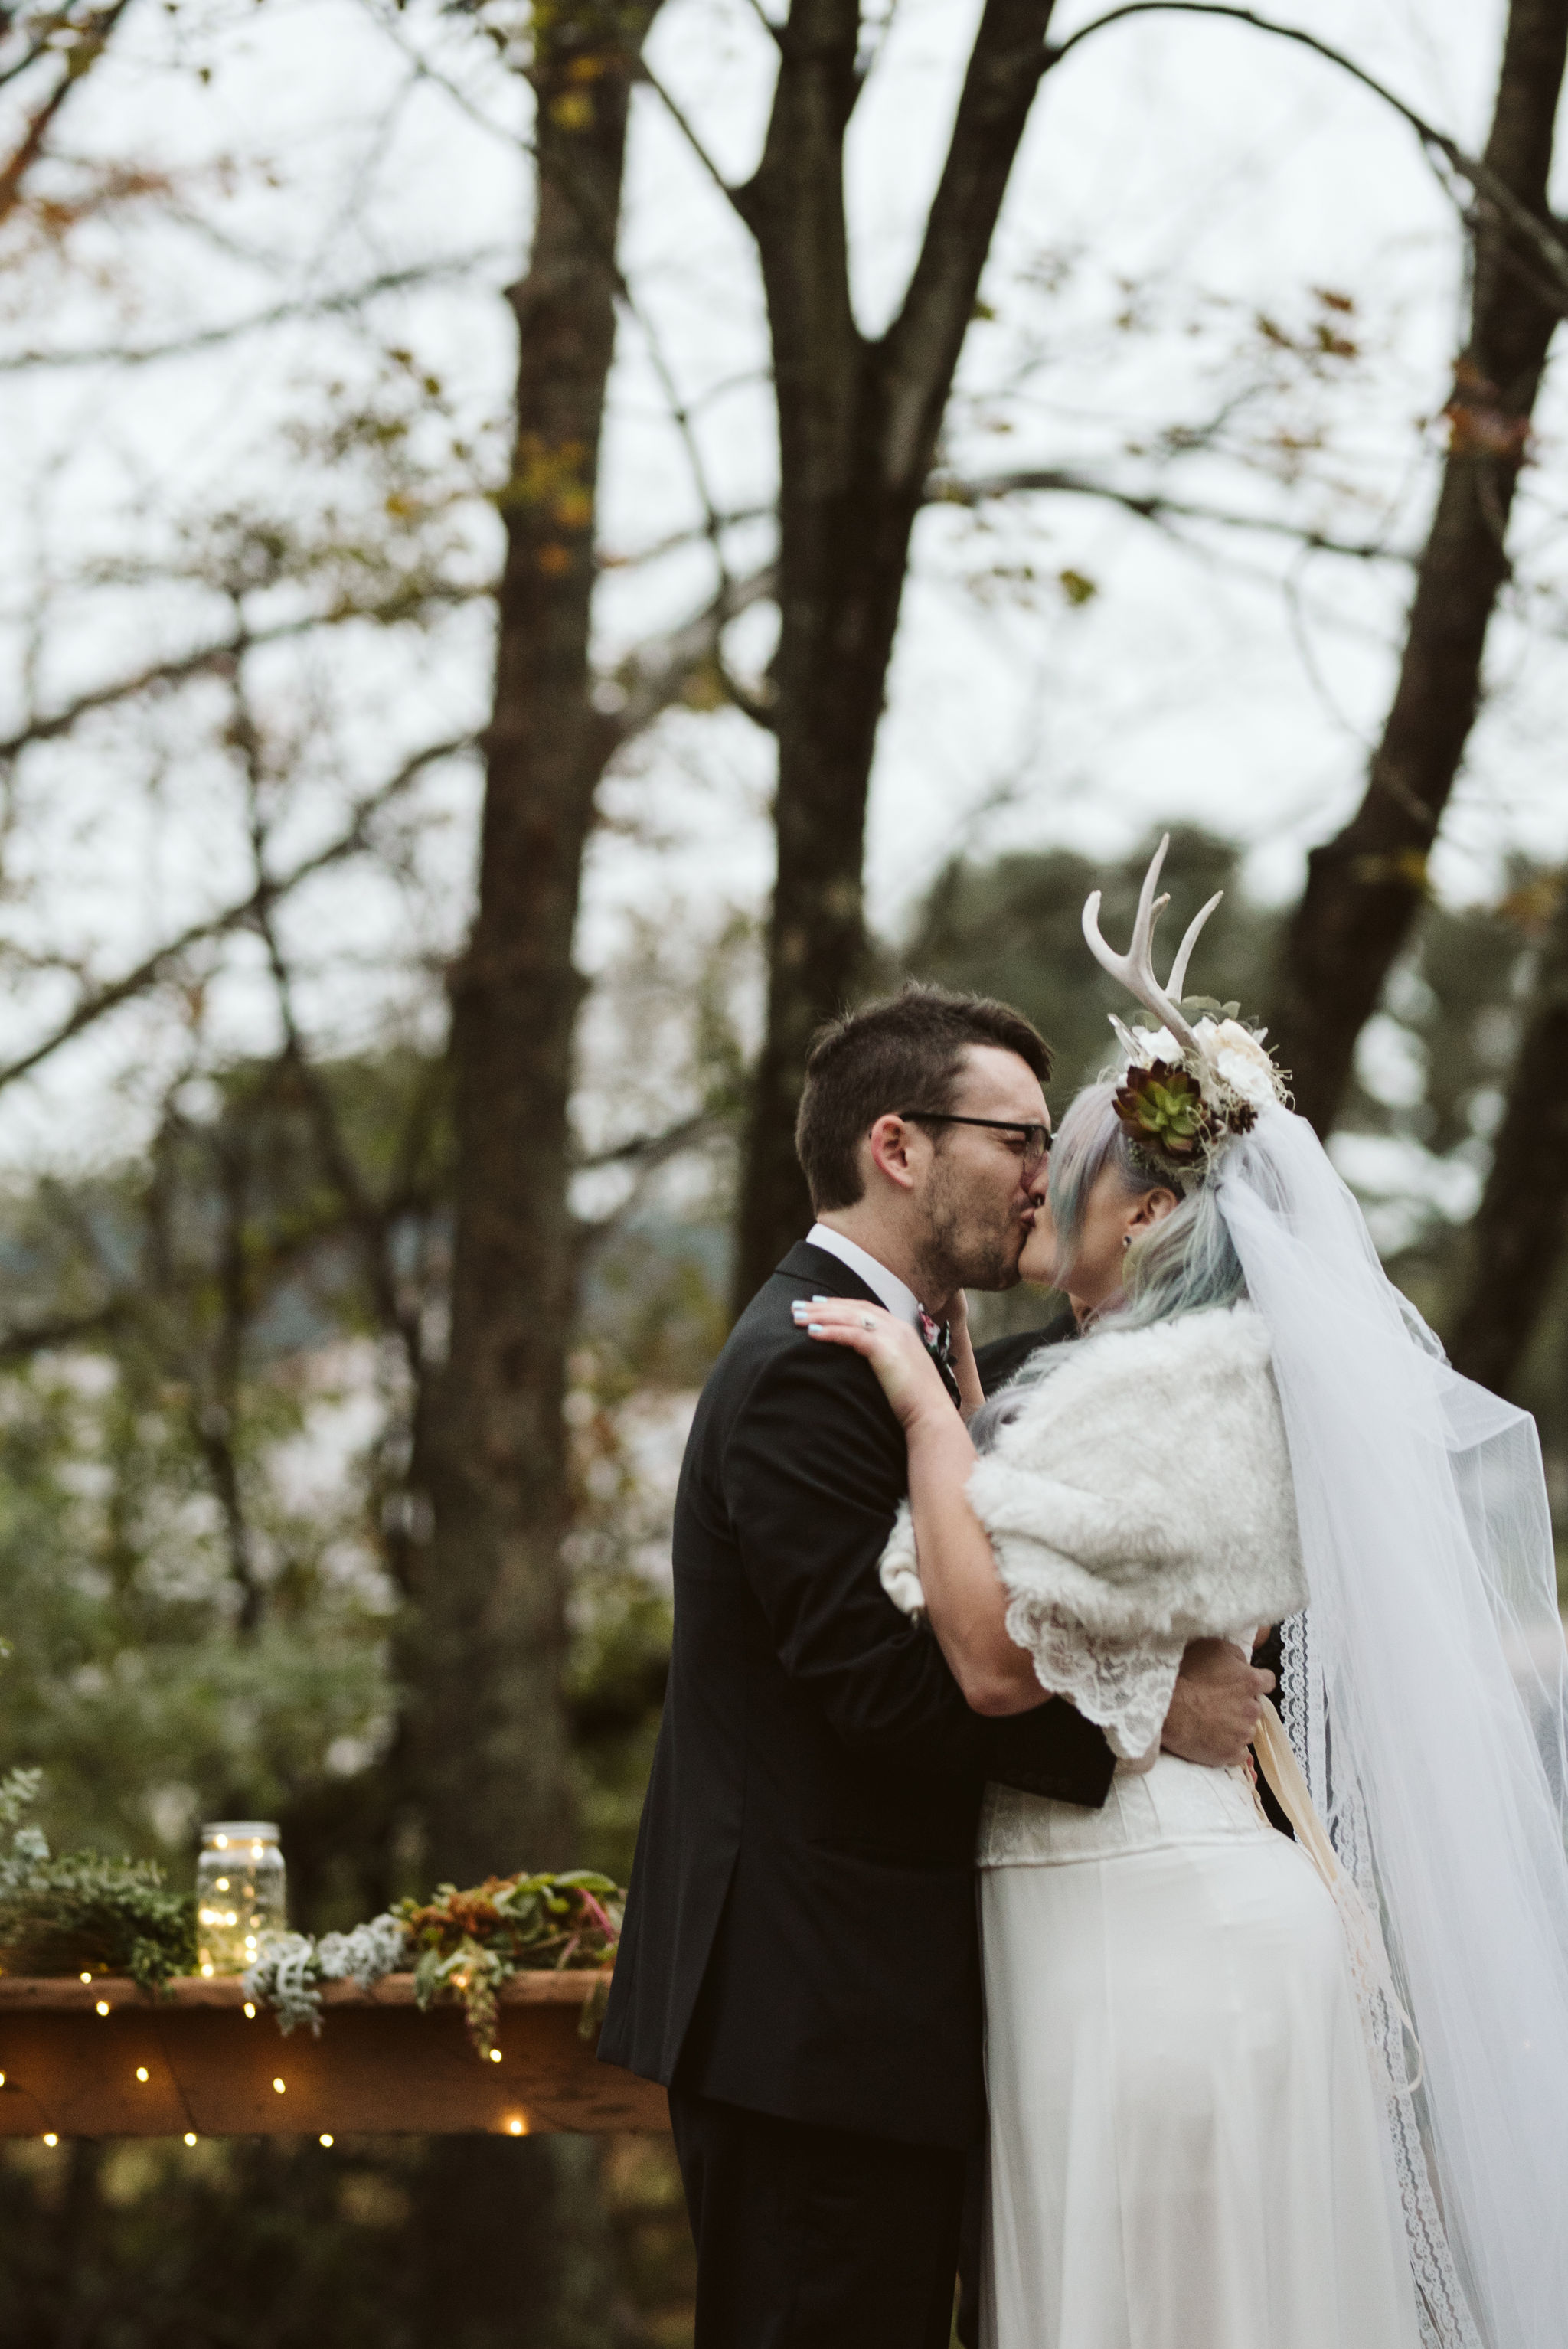  Maryland, Baltimore Wedding Photographer, Backyard Wedding, Fall, October, Dark Bohemian, Whimsical, Fun, Bride and groom Having First Kiss, Just Married, Flower Crown with Succulents and Antlers 